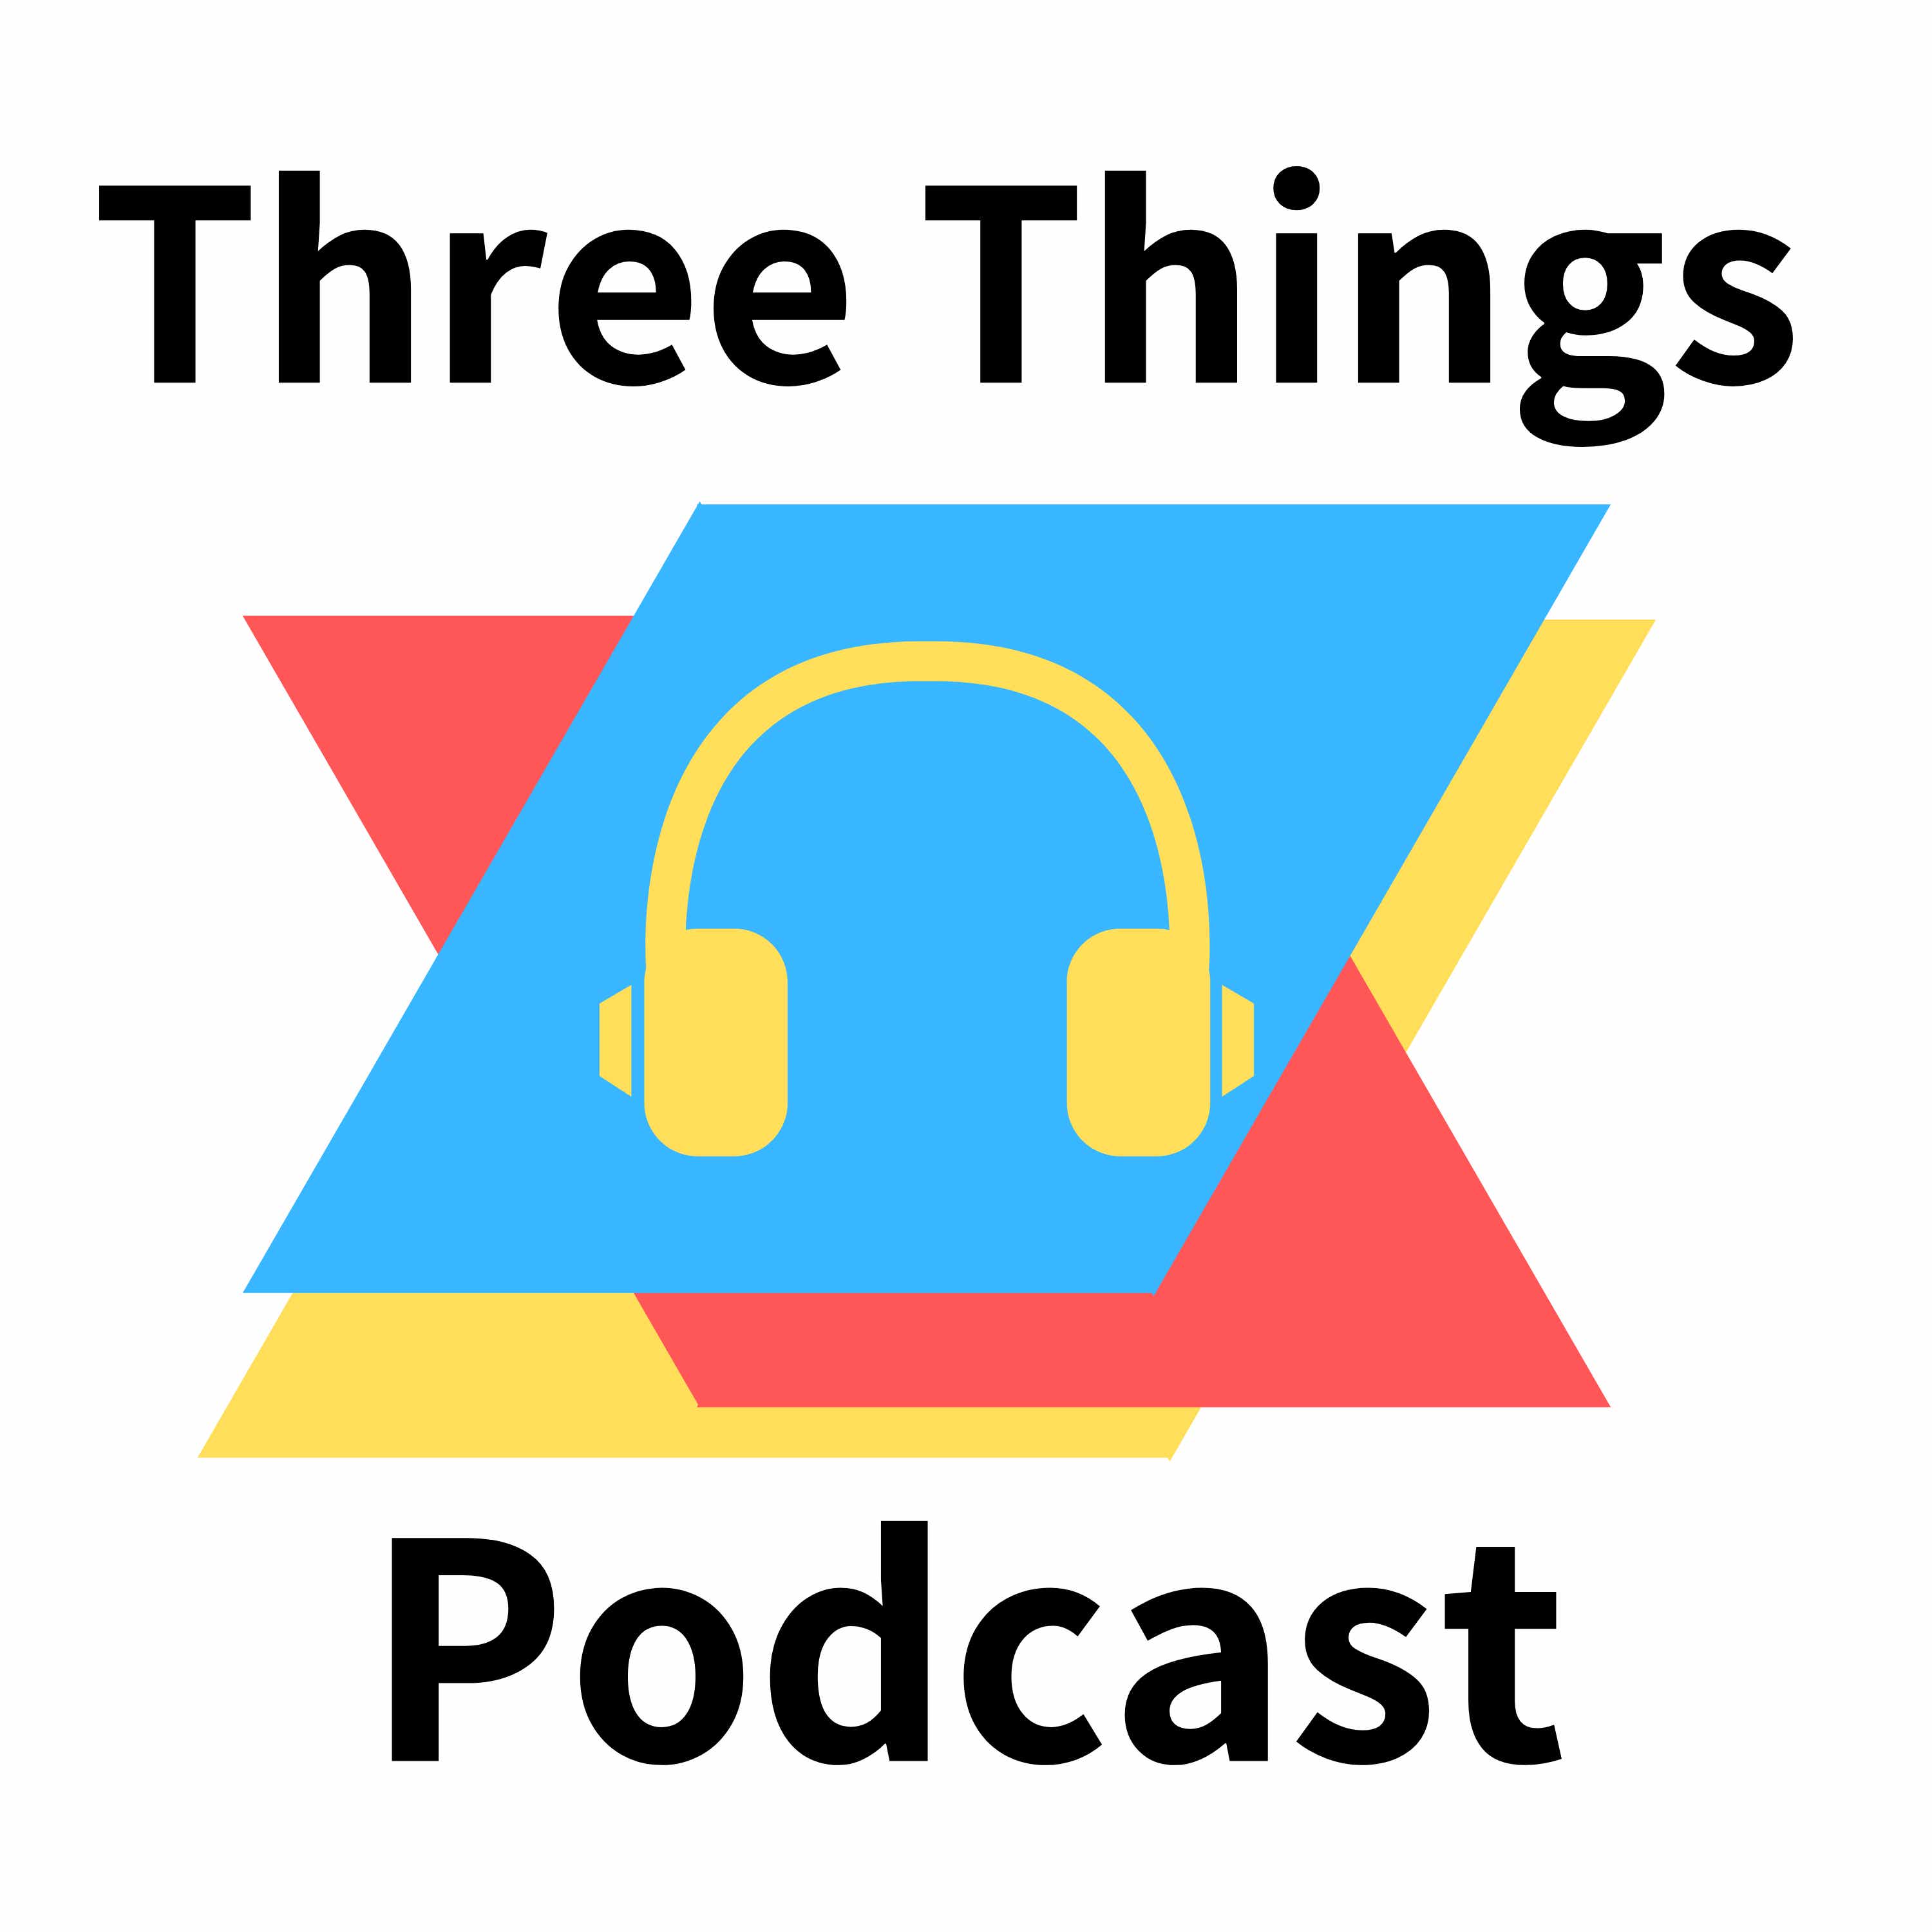 Three Things Newsletter (private feed for vera@labri.za.org)